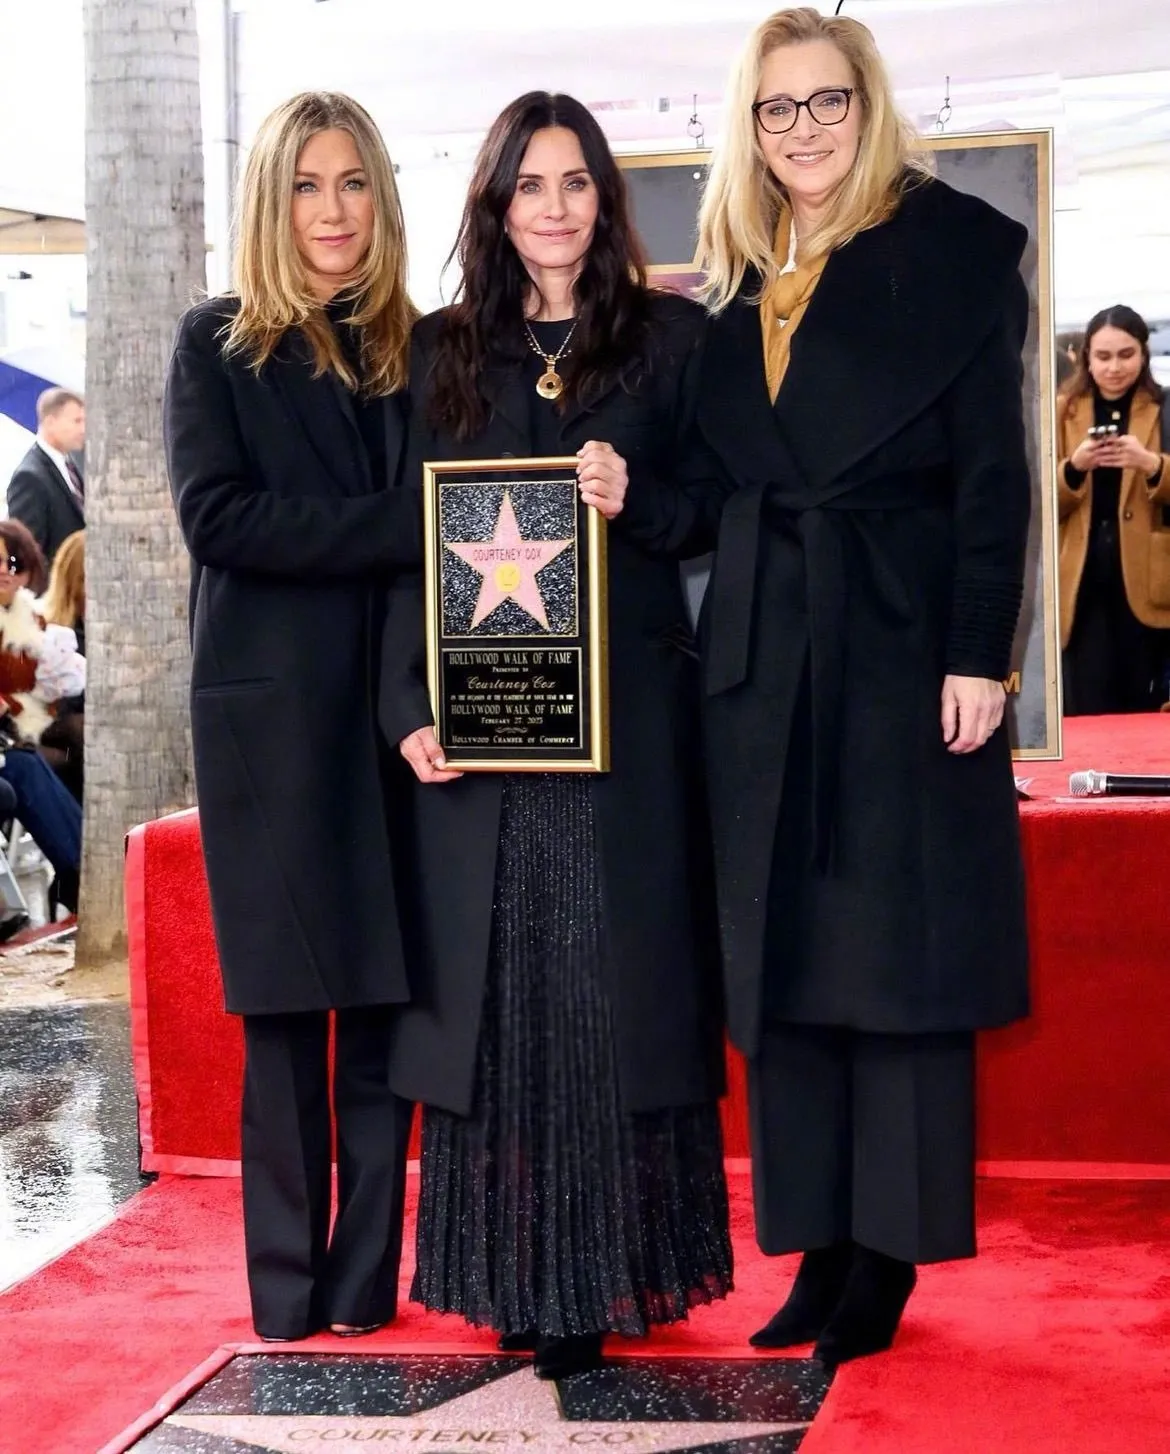 Courteney Cox leaves a star of her own at Hollywood's Walk Of Fame | FMV6